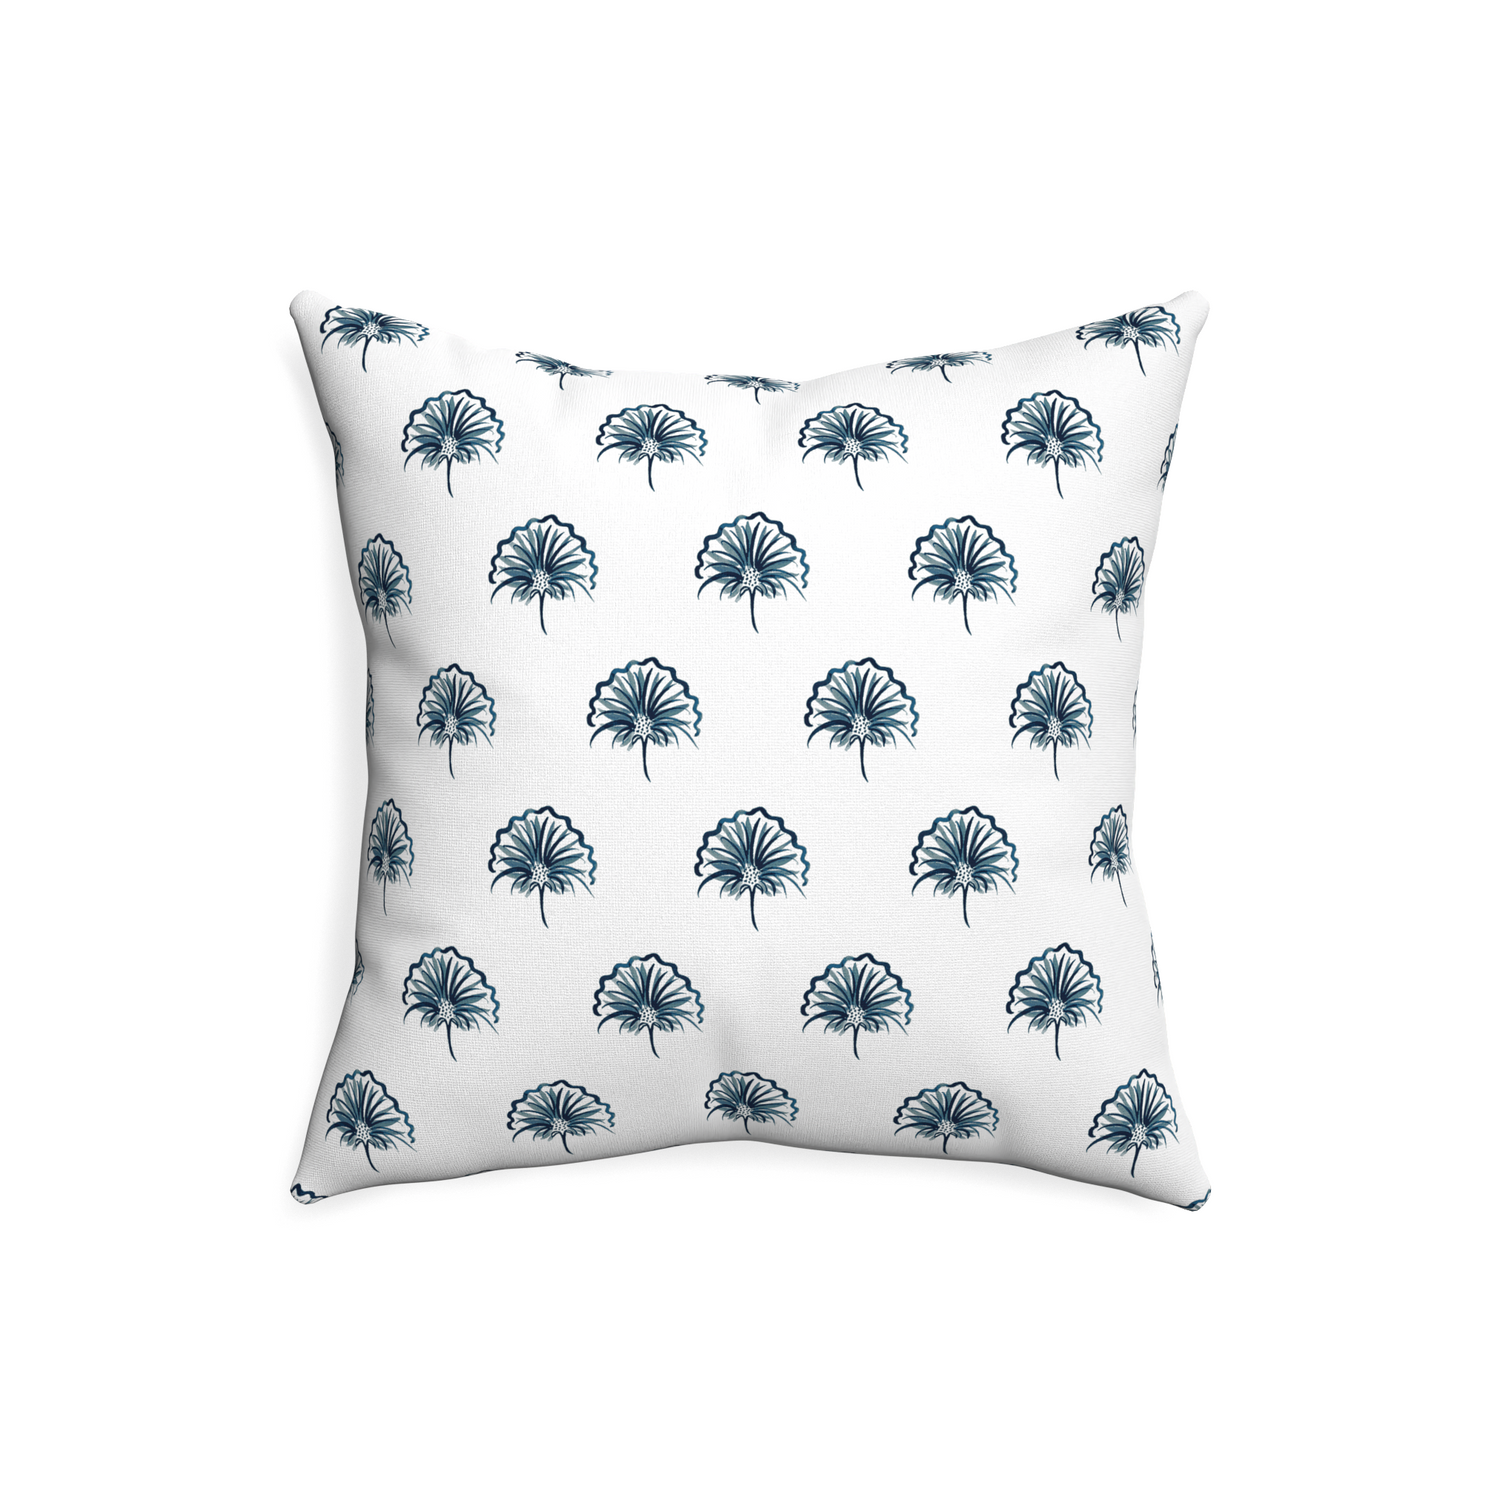 20-square penelope midnight custom pillow with none on white background